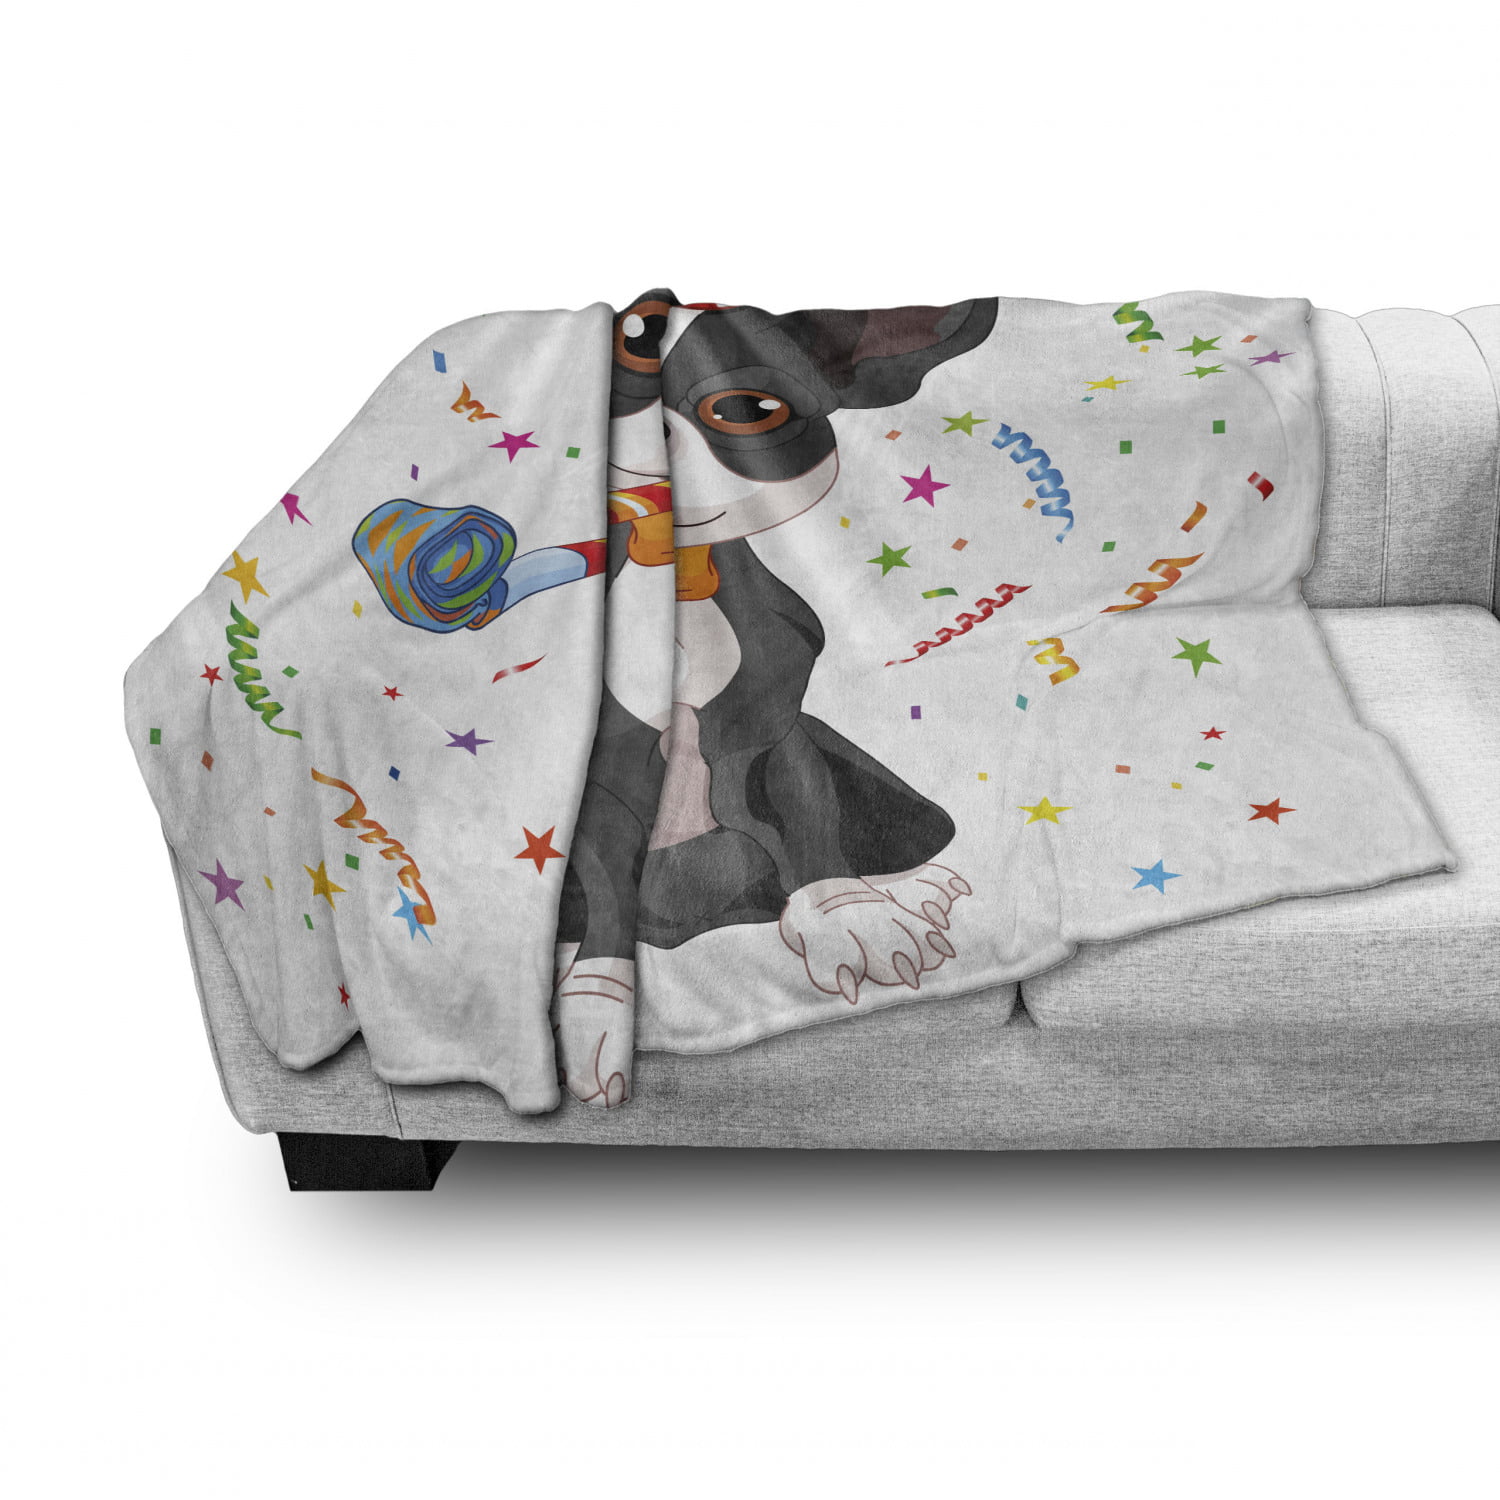 Multicolor Cozy Plush for Indoor and Outdoor Use Party Puppy Celebrating His Birthday on Colorful Stary Background Ambesonne Boston Terrier Soft Flannel Fleece Throw Blanket 60 x 80 